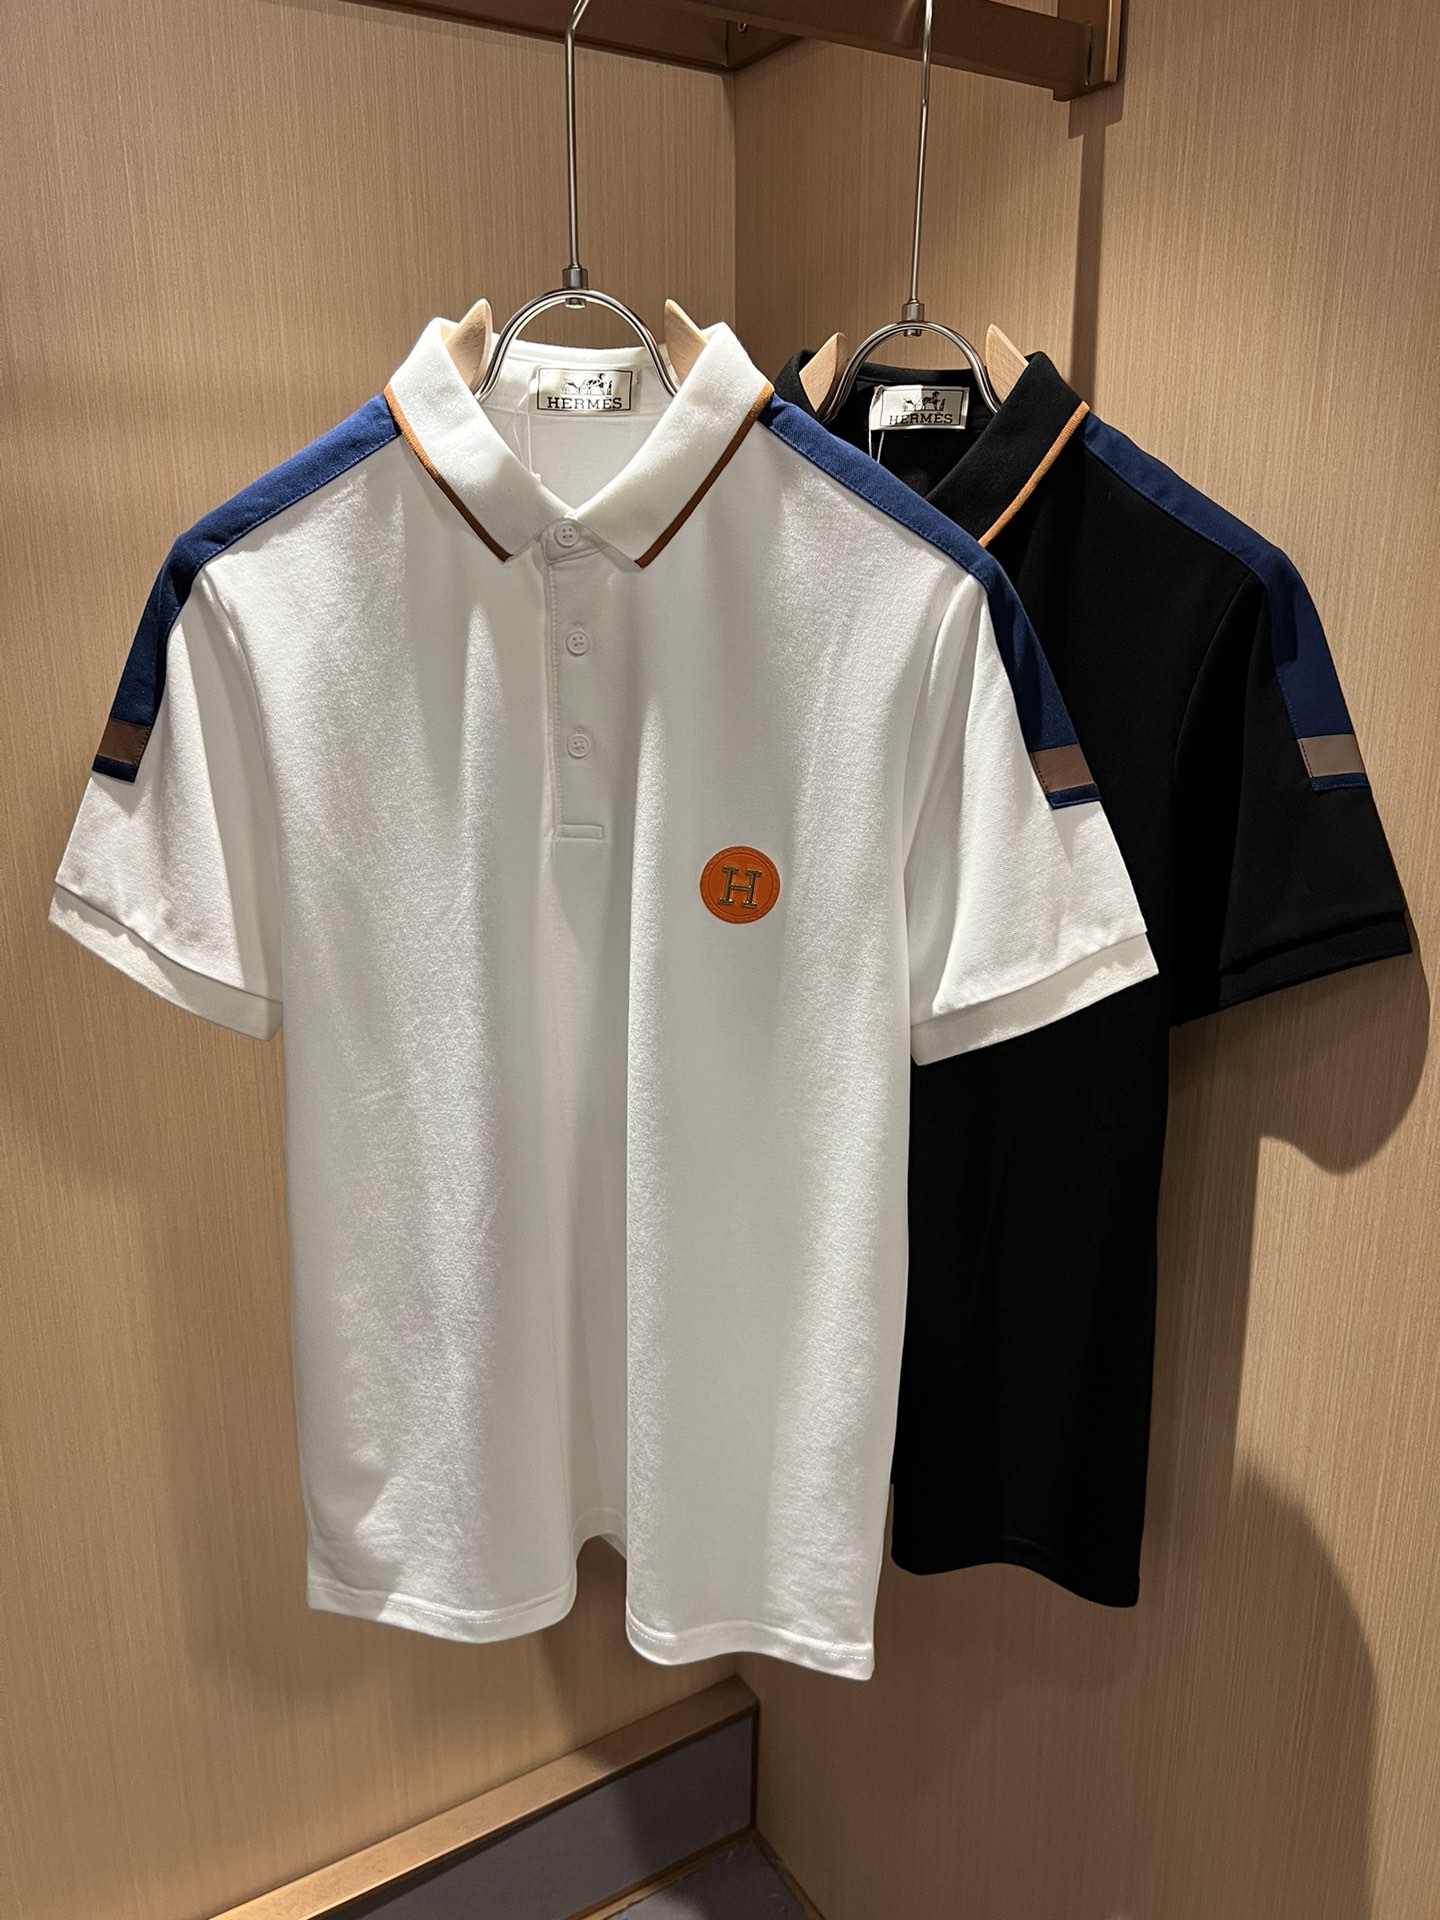 Hermes Clothing Polo T-Shirt Men Cotton Spring/Summer Collection Fashion Short Sleeve